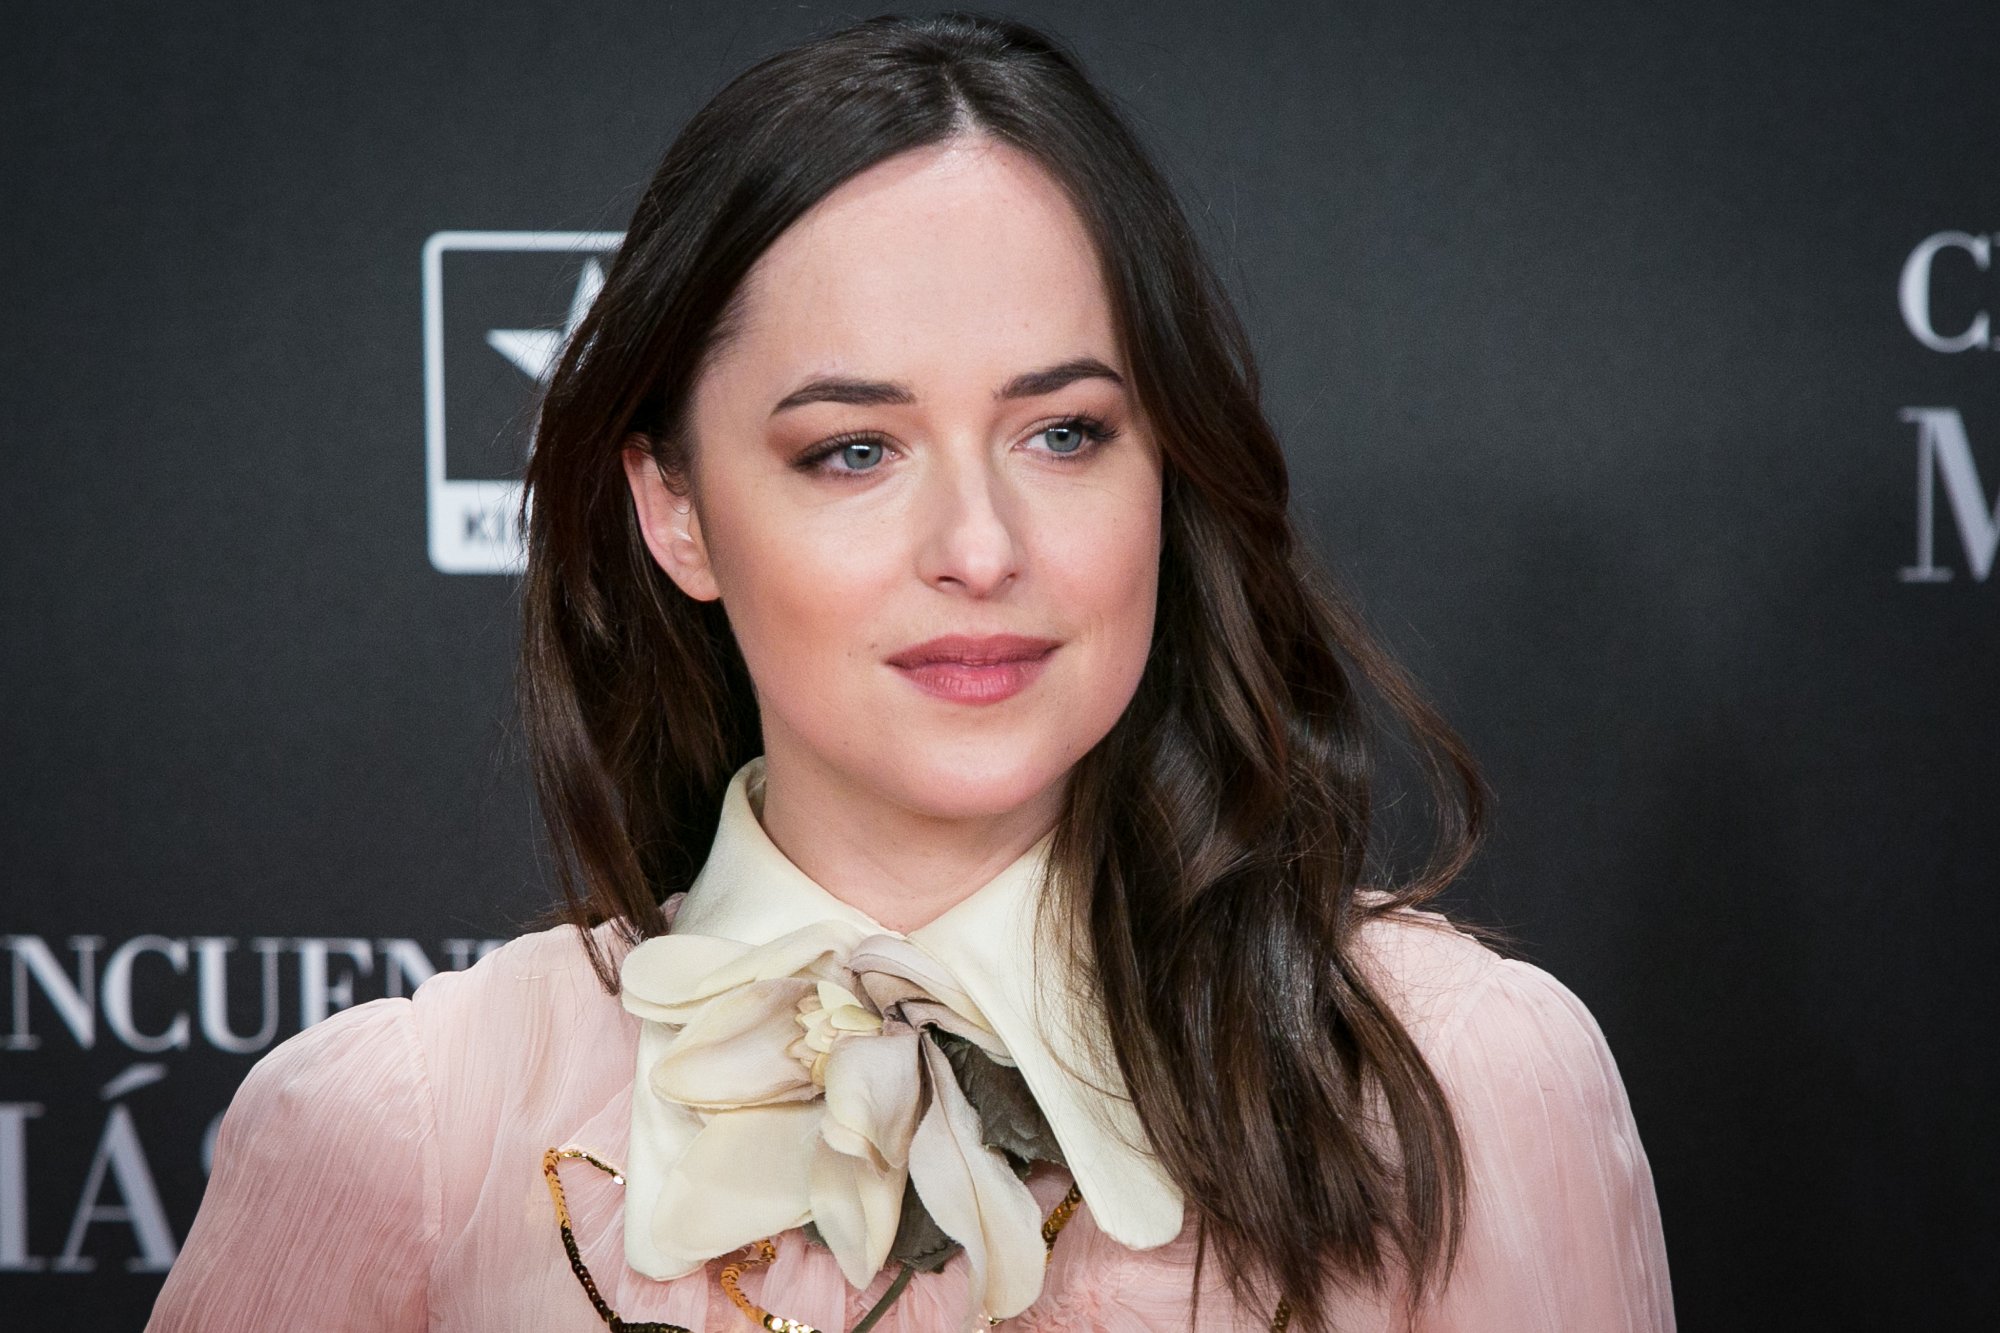 'Fifty Shades' actor Dakota Johnson wearing a pink blouse in front of a black step and repeat